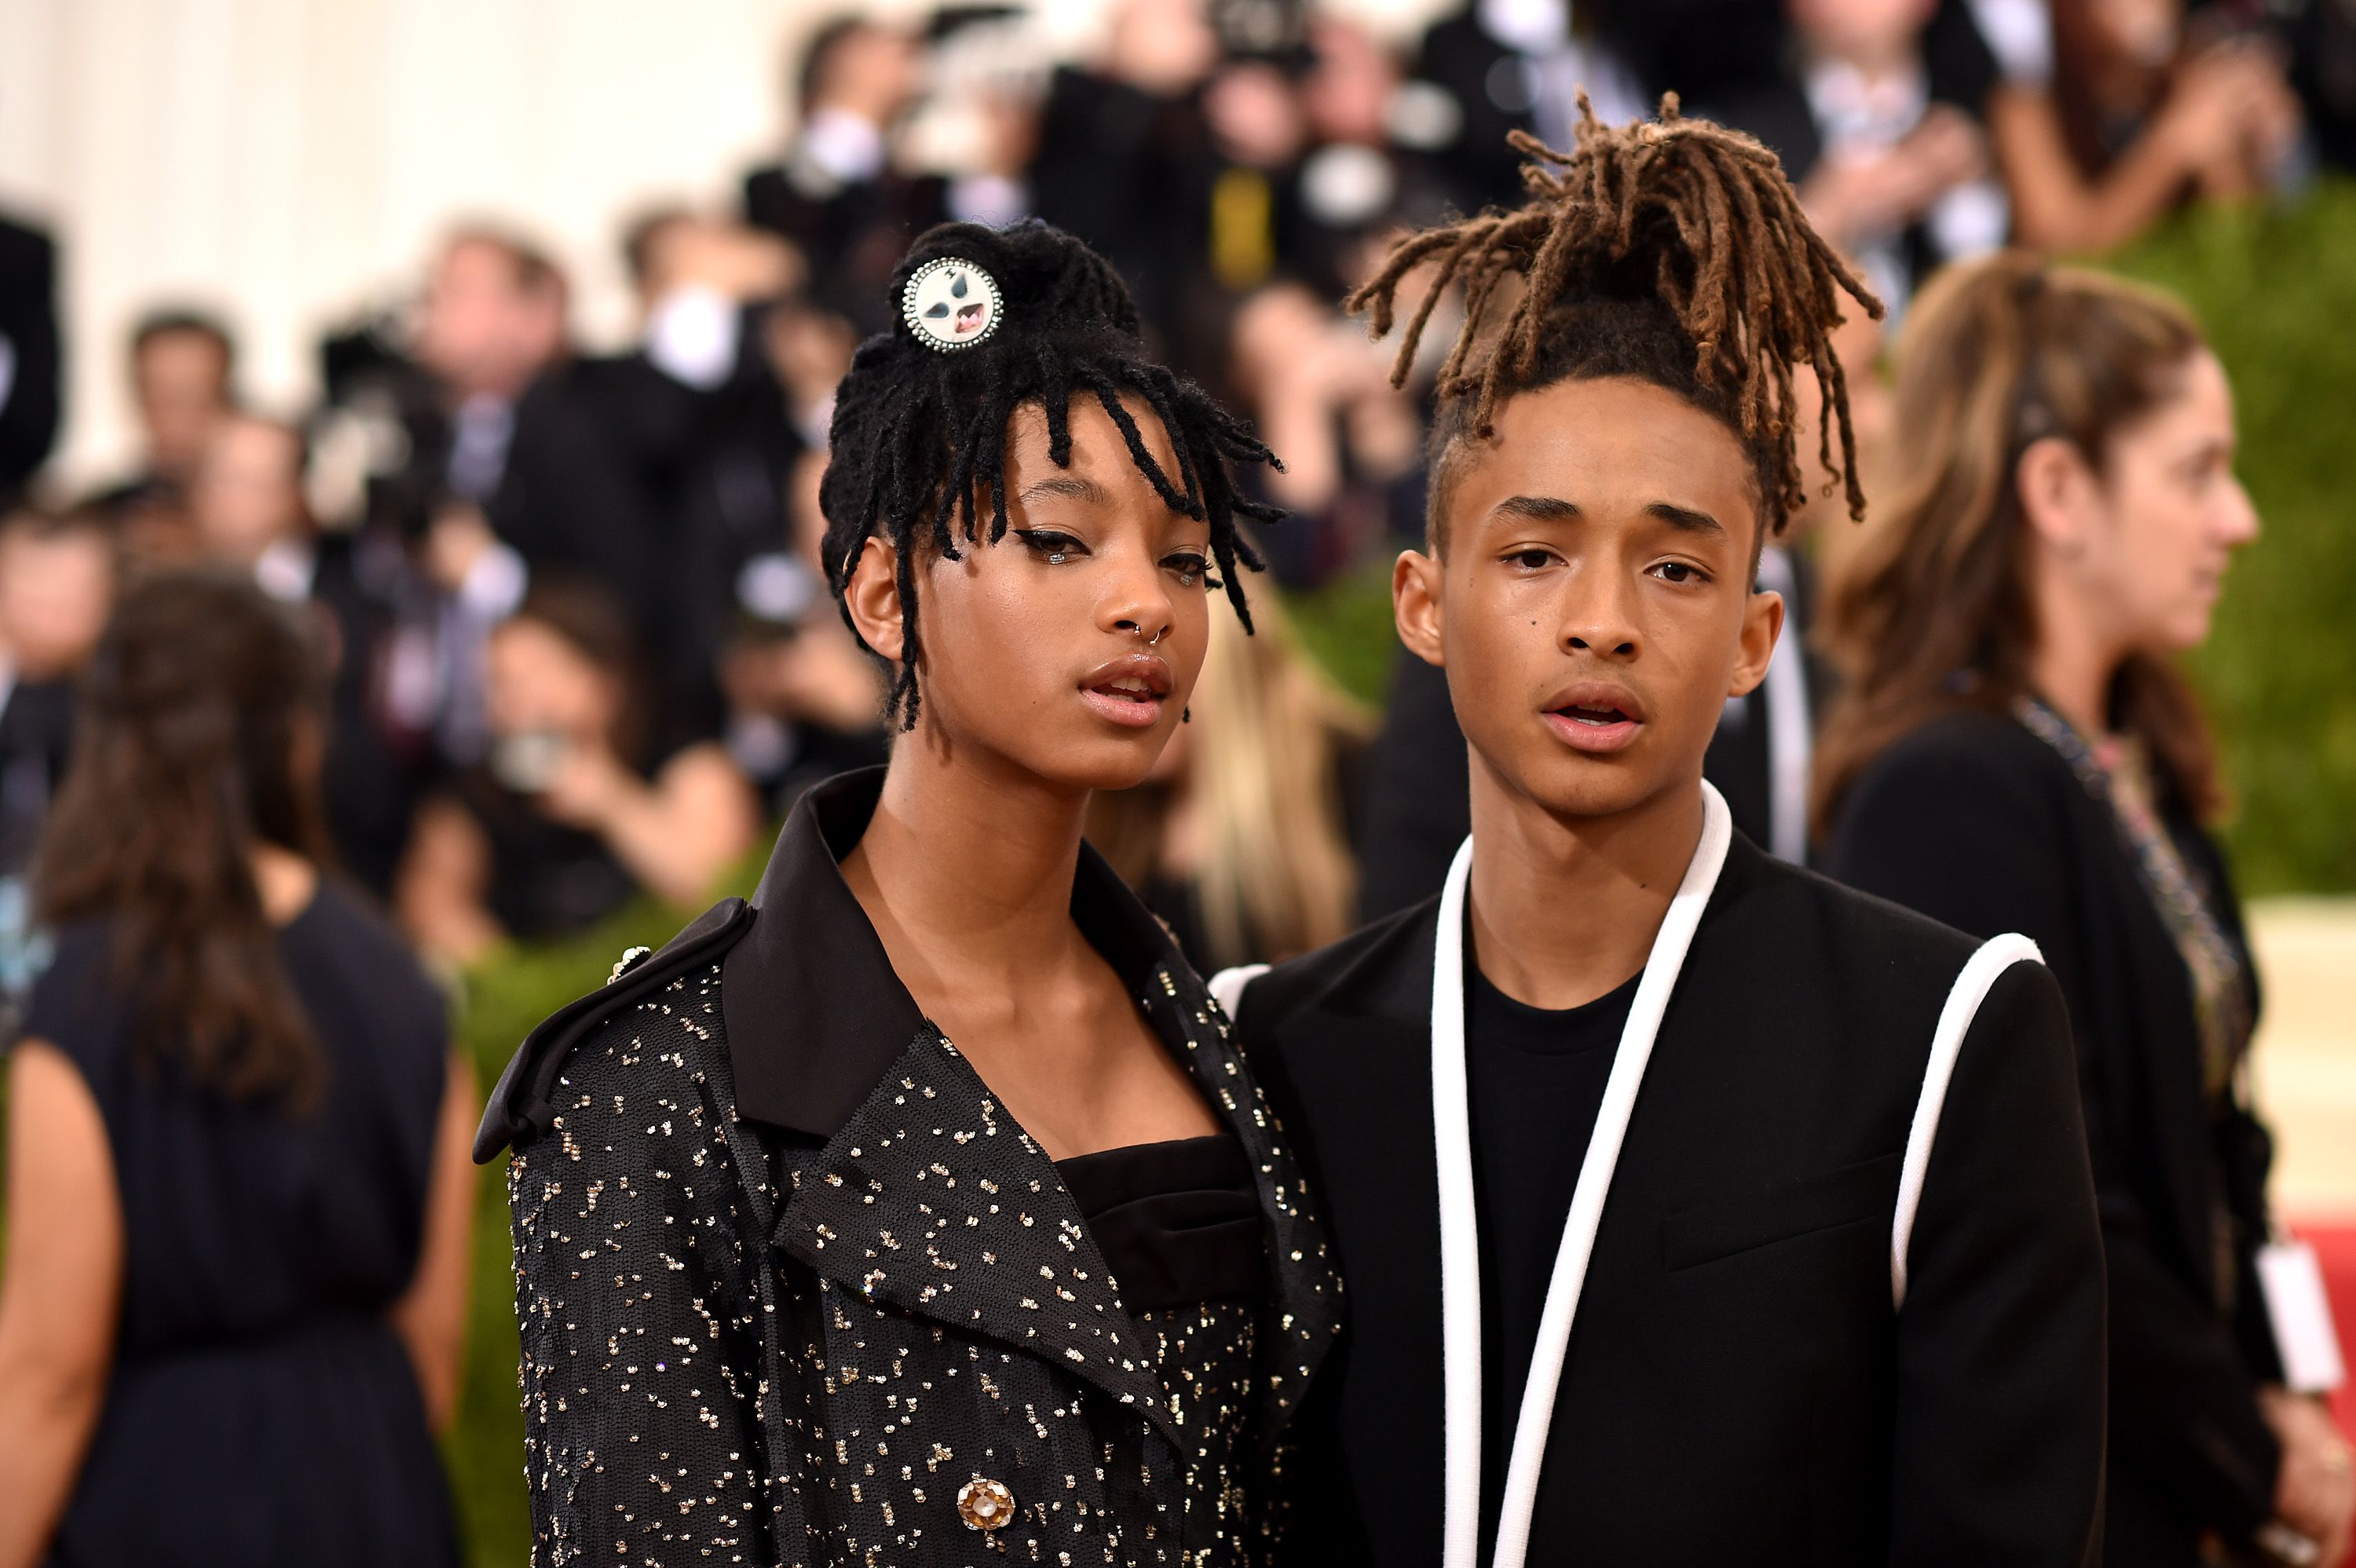 Willow Smith (L) and Jaden Smith attend the "Manus x Machina: Fashion In An Age Of Technology" Costume Institute Gala at Metropolitan Museum of Art on May 2, 2016 in New York City. | Getty Images